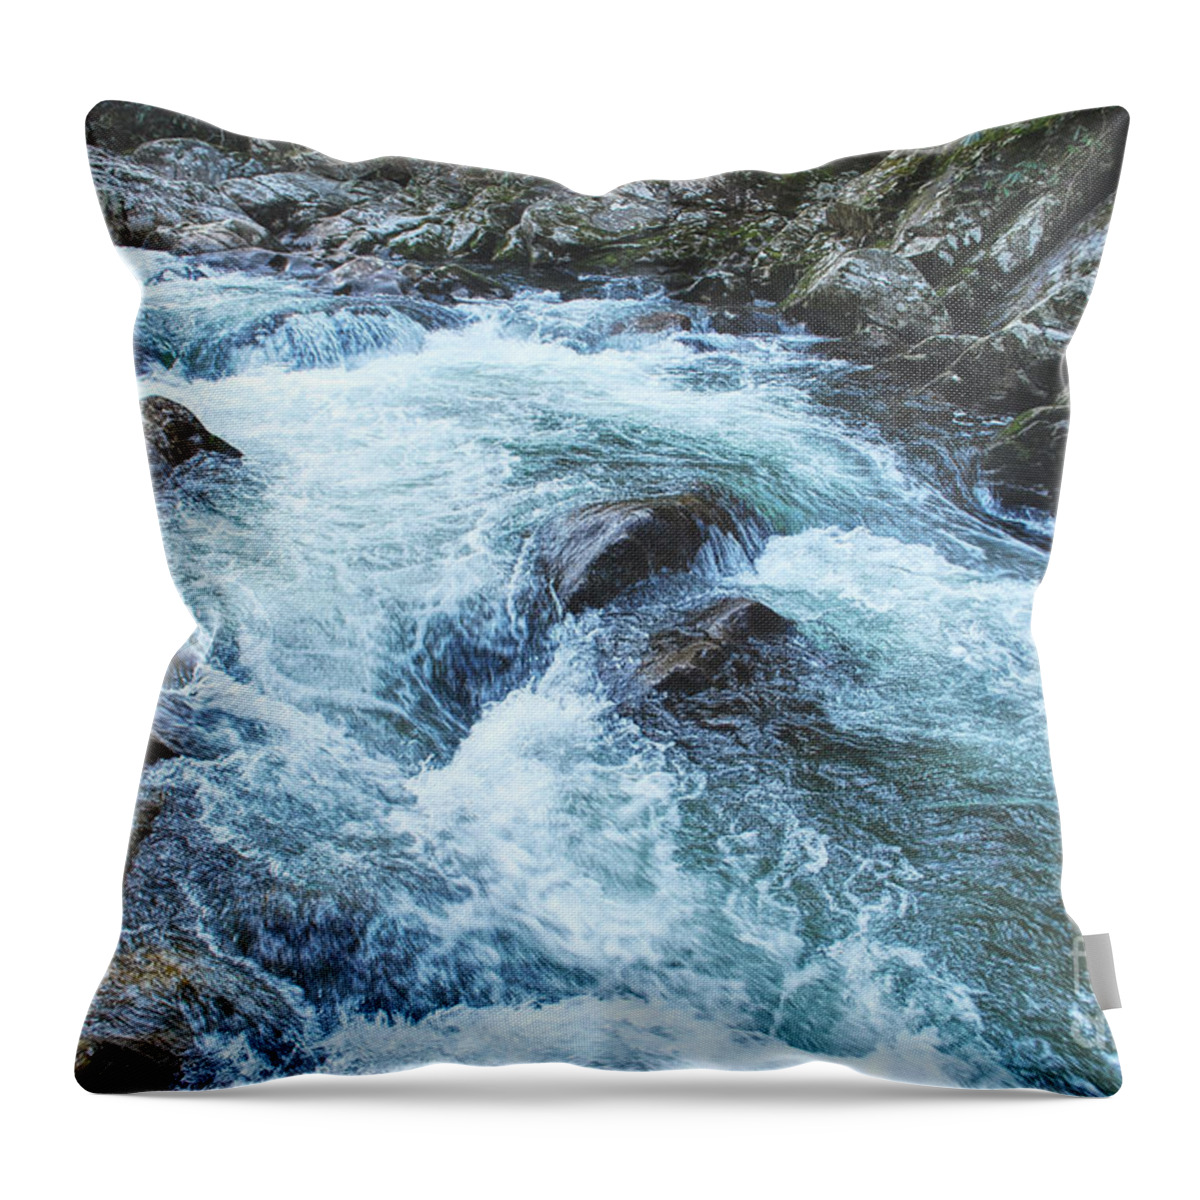 Photography Throw Pillow featuring the photograph White Water Rapids by Phil Perkins